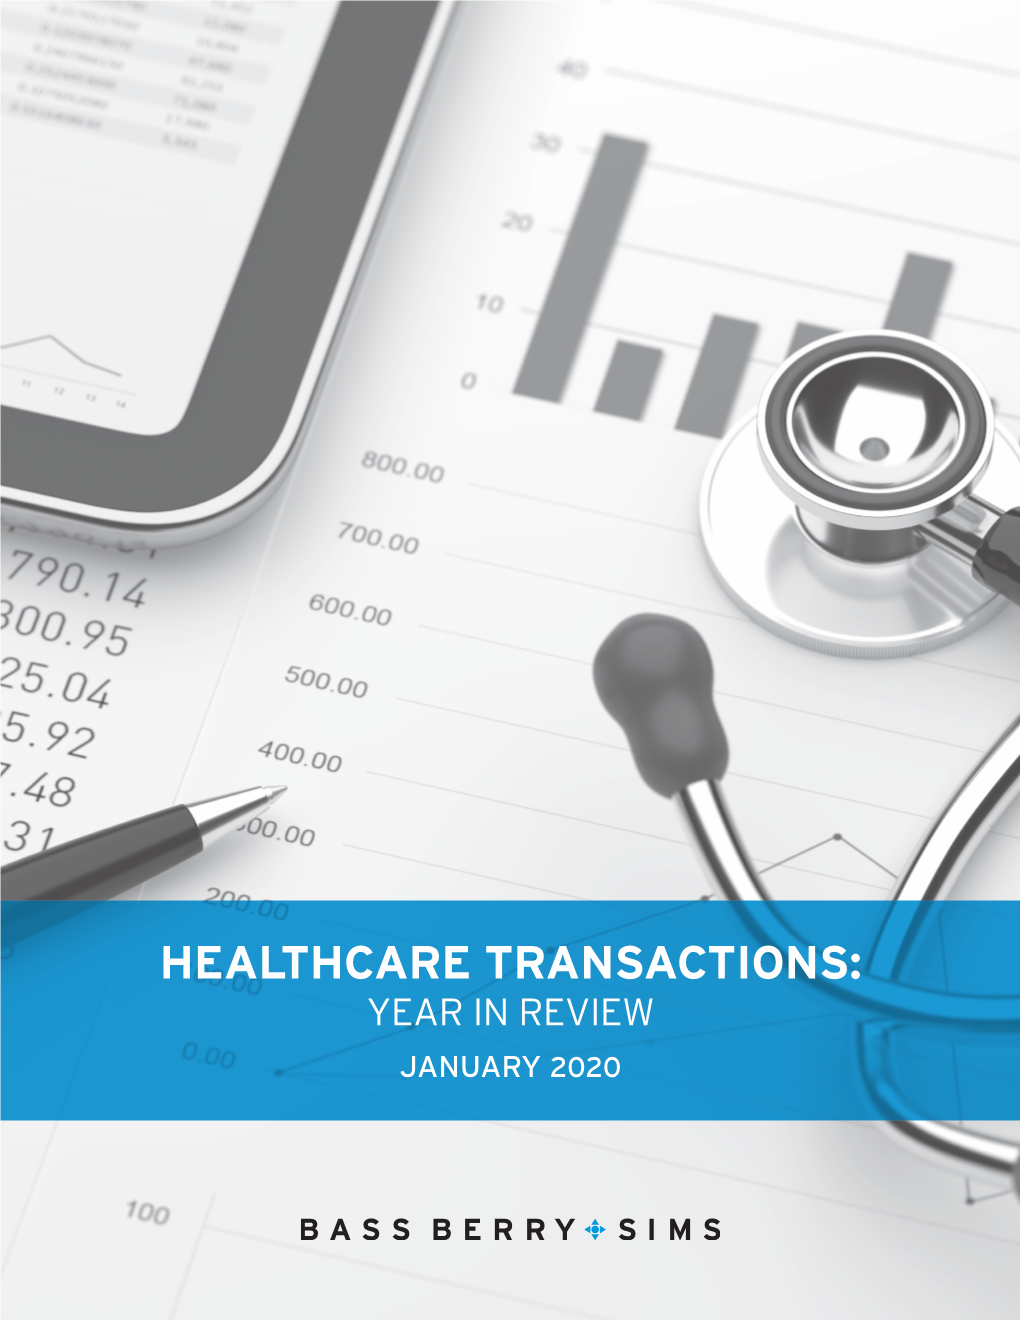 HEALTHCARE TRANSACTIONS: YEAR in REVIEW JANUARY 2020 Overview